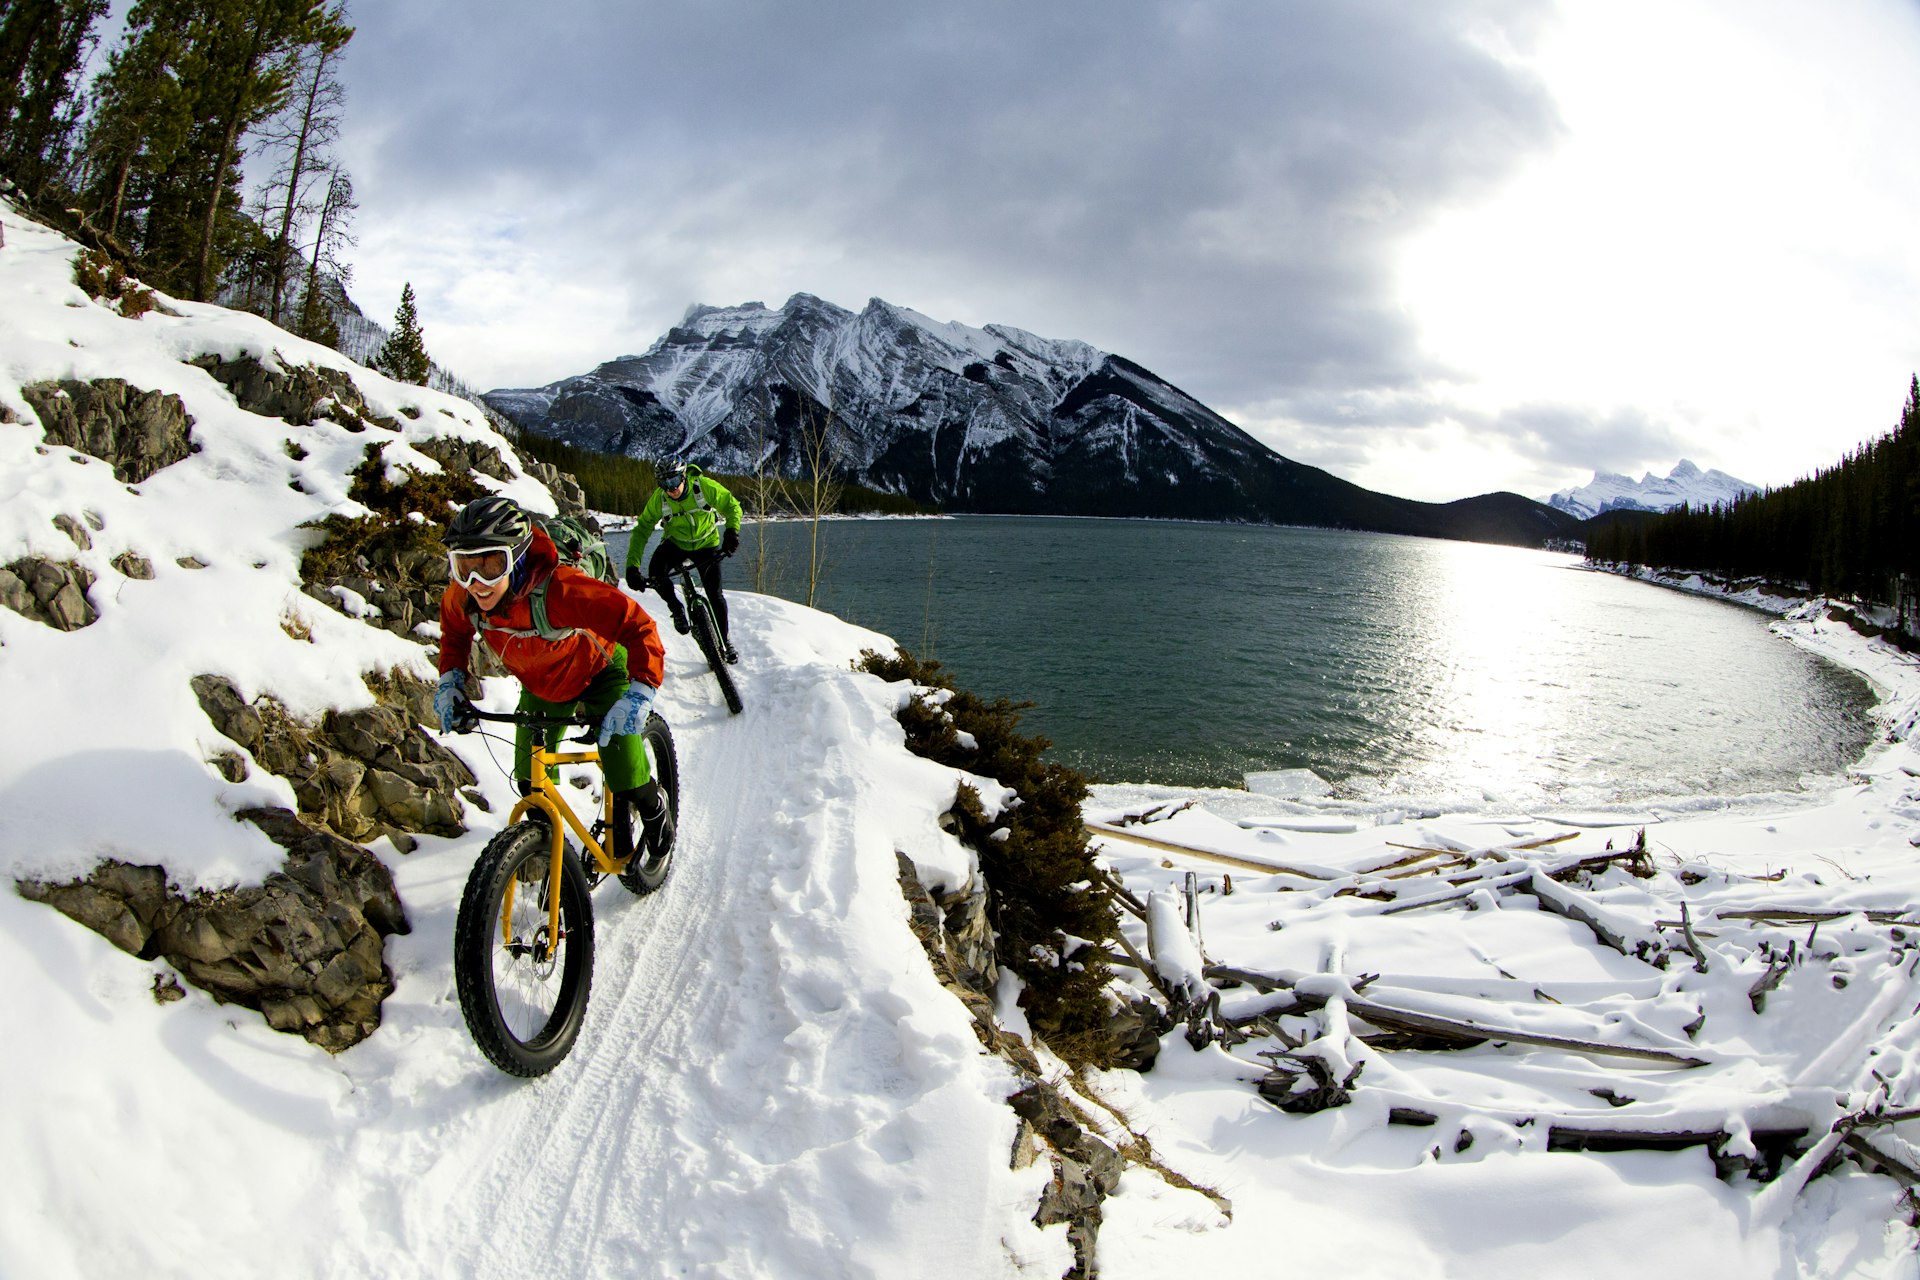 A couple ride bikes with fat tires over a snowy track by a lake in a moutainous area